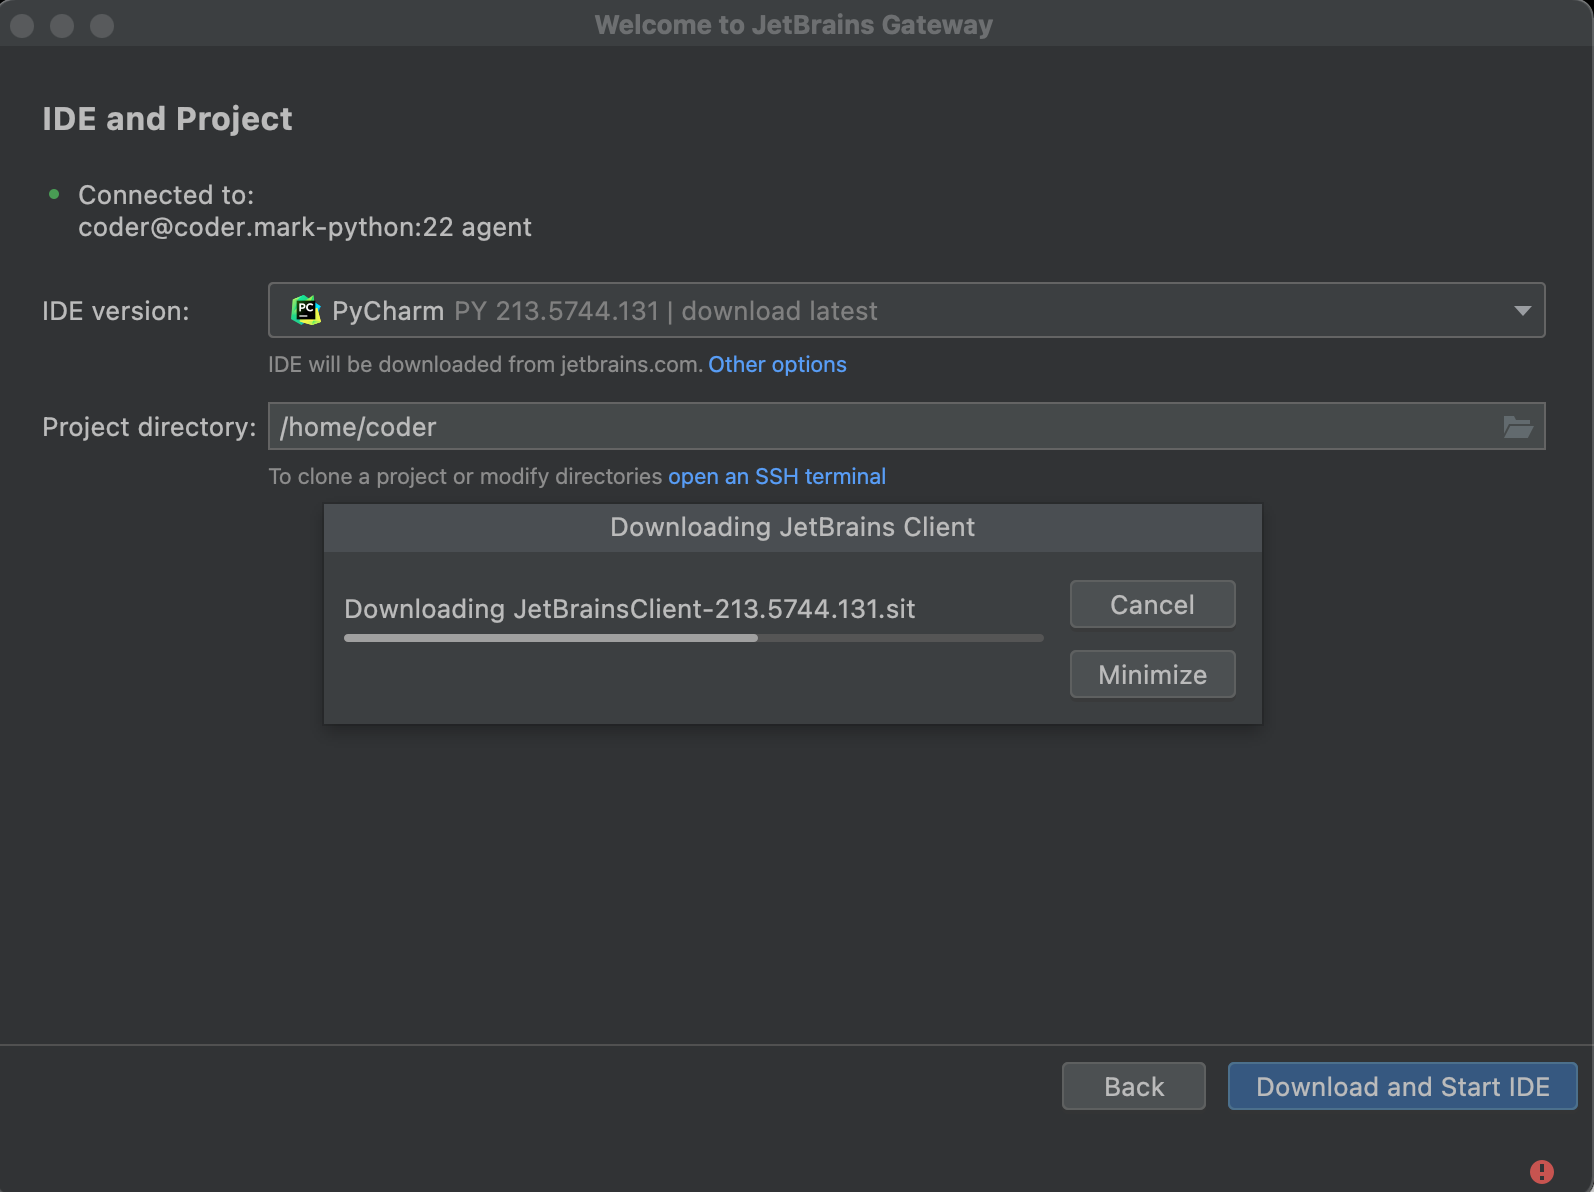 Gateway downloading IDE and client